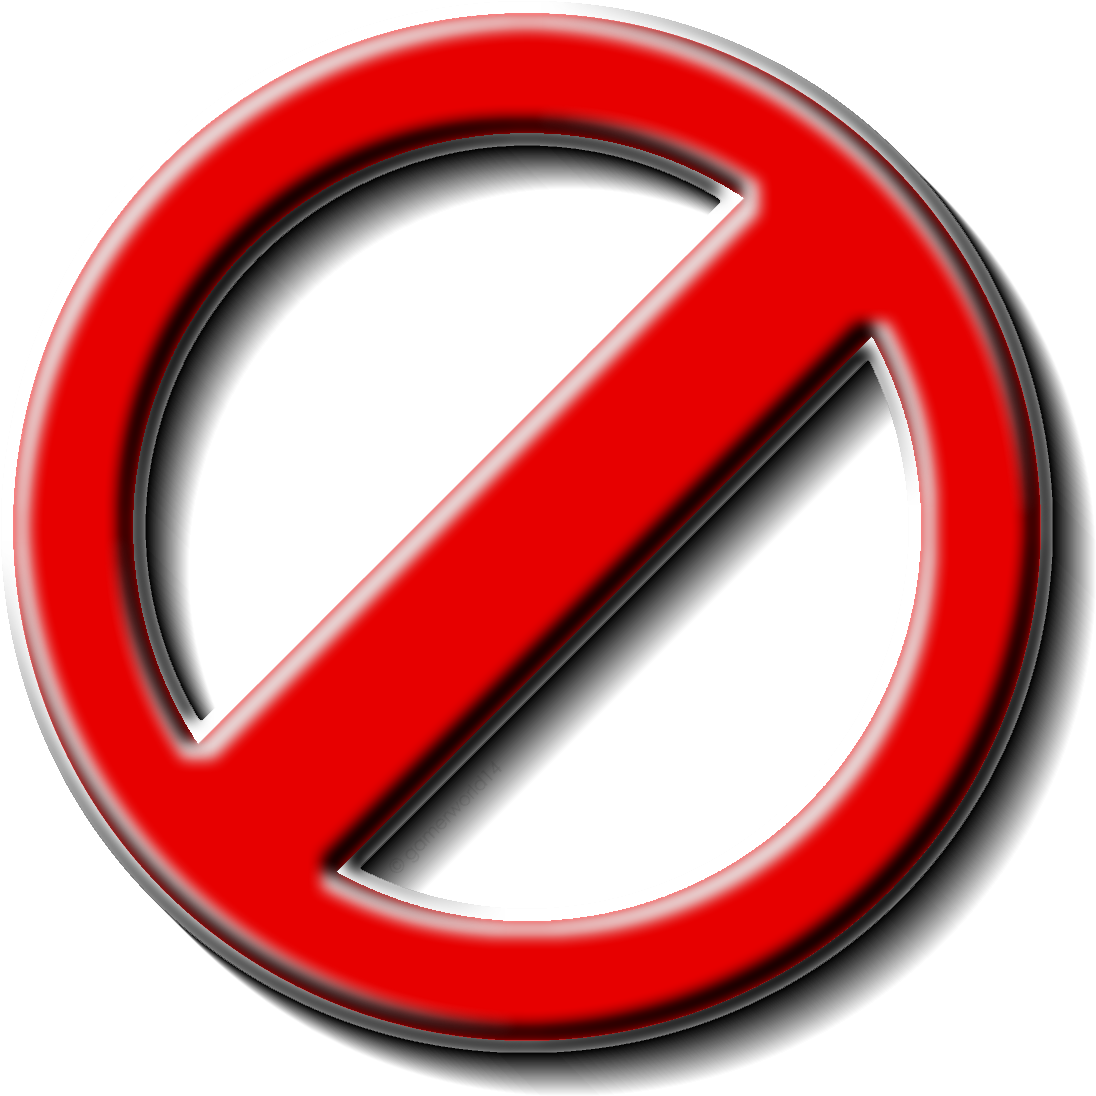 Do Not Sign Icon Png Image - Anna University Paper Chasing Cost (1200x1200)